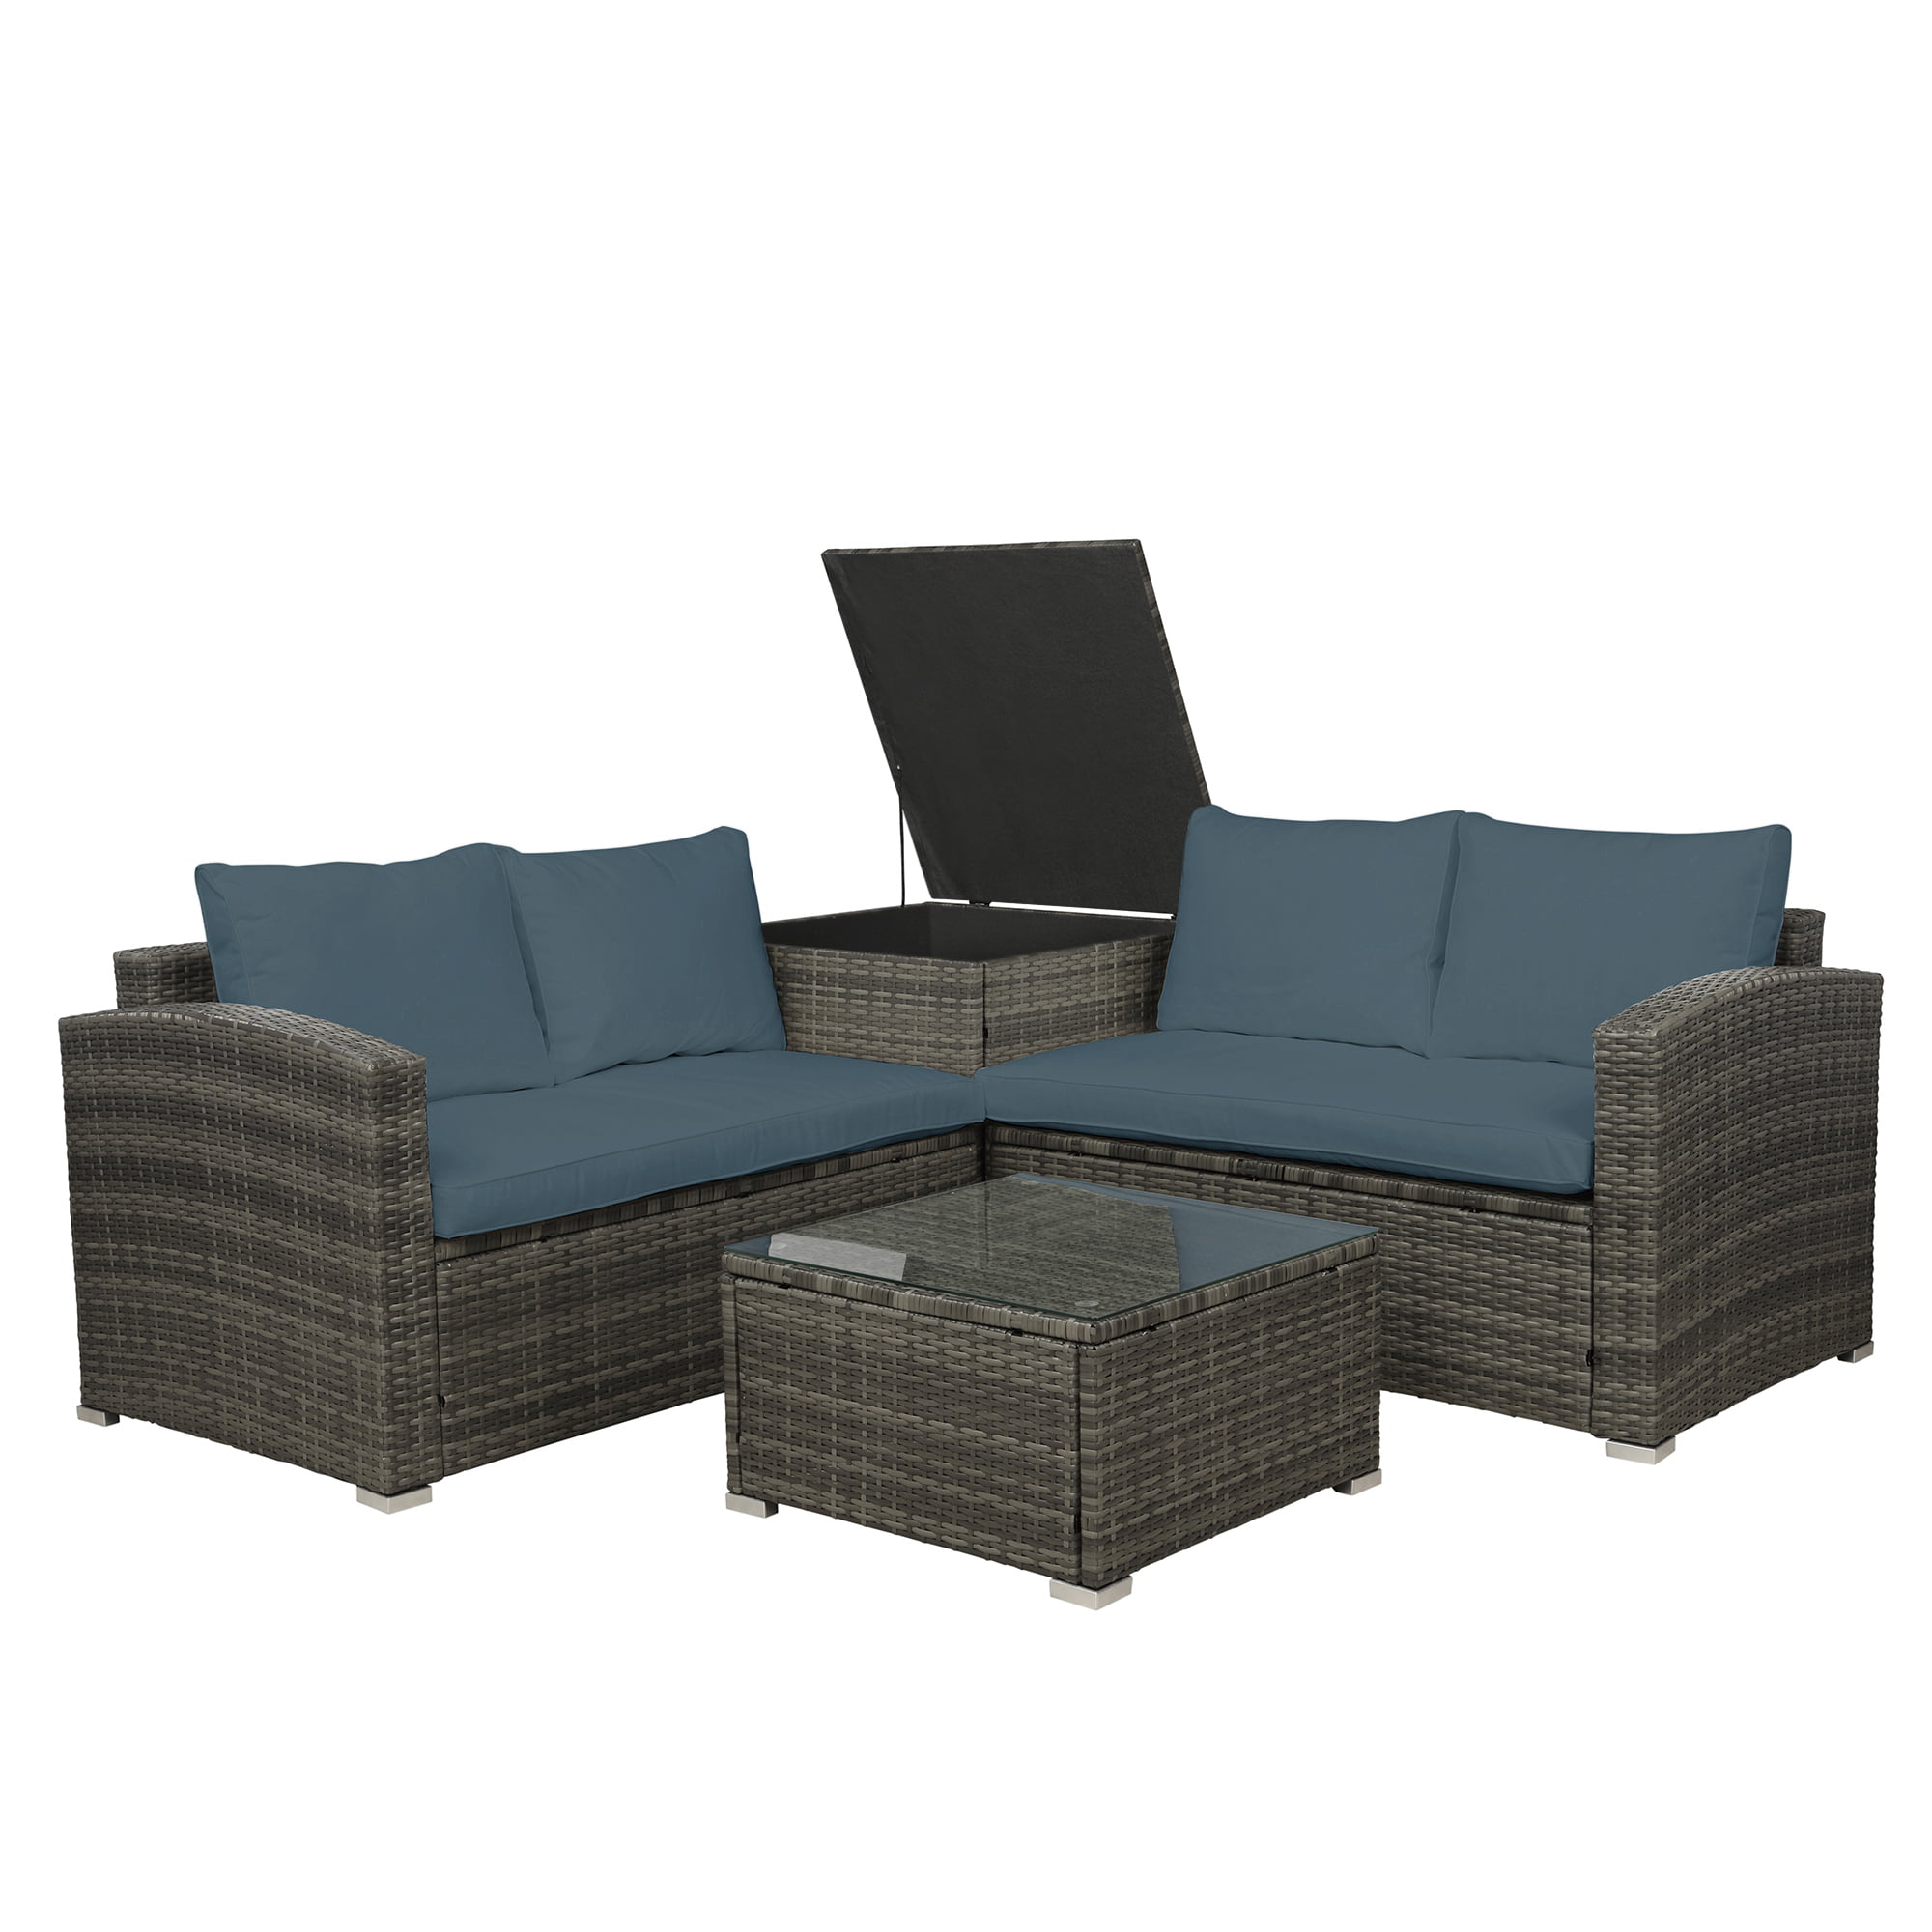 Outdoor Patio Furniture Sets Clearance, SEGAMRT 4-Piece Wicker Conversation Furniture Set w/ Seat Cushions & Tempered Glass Dining Table, Wicker Sofa Sets for Porch Poolside Backyard Garden, S13098